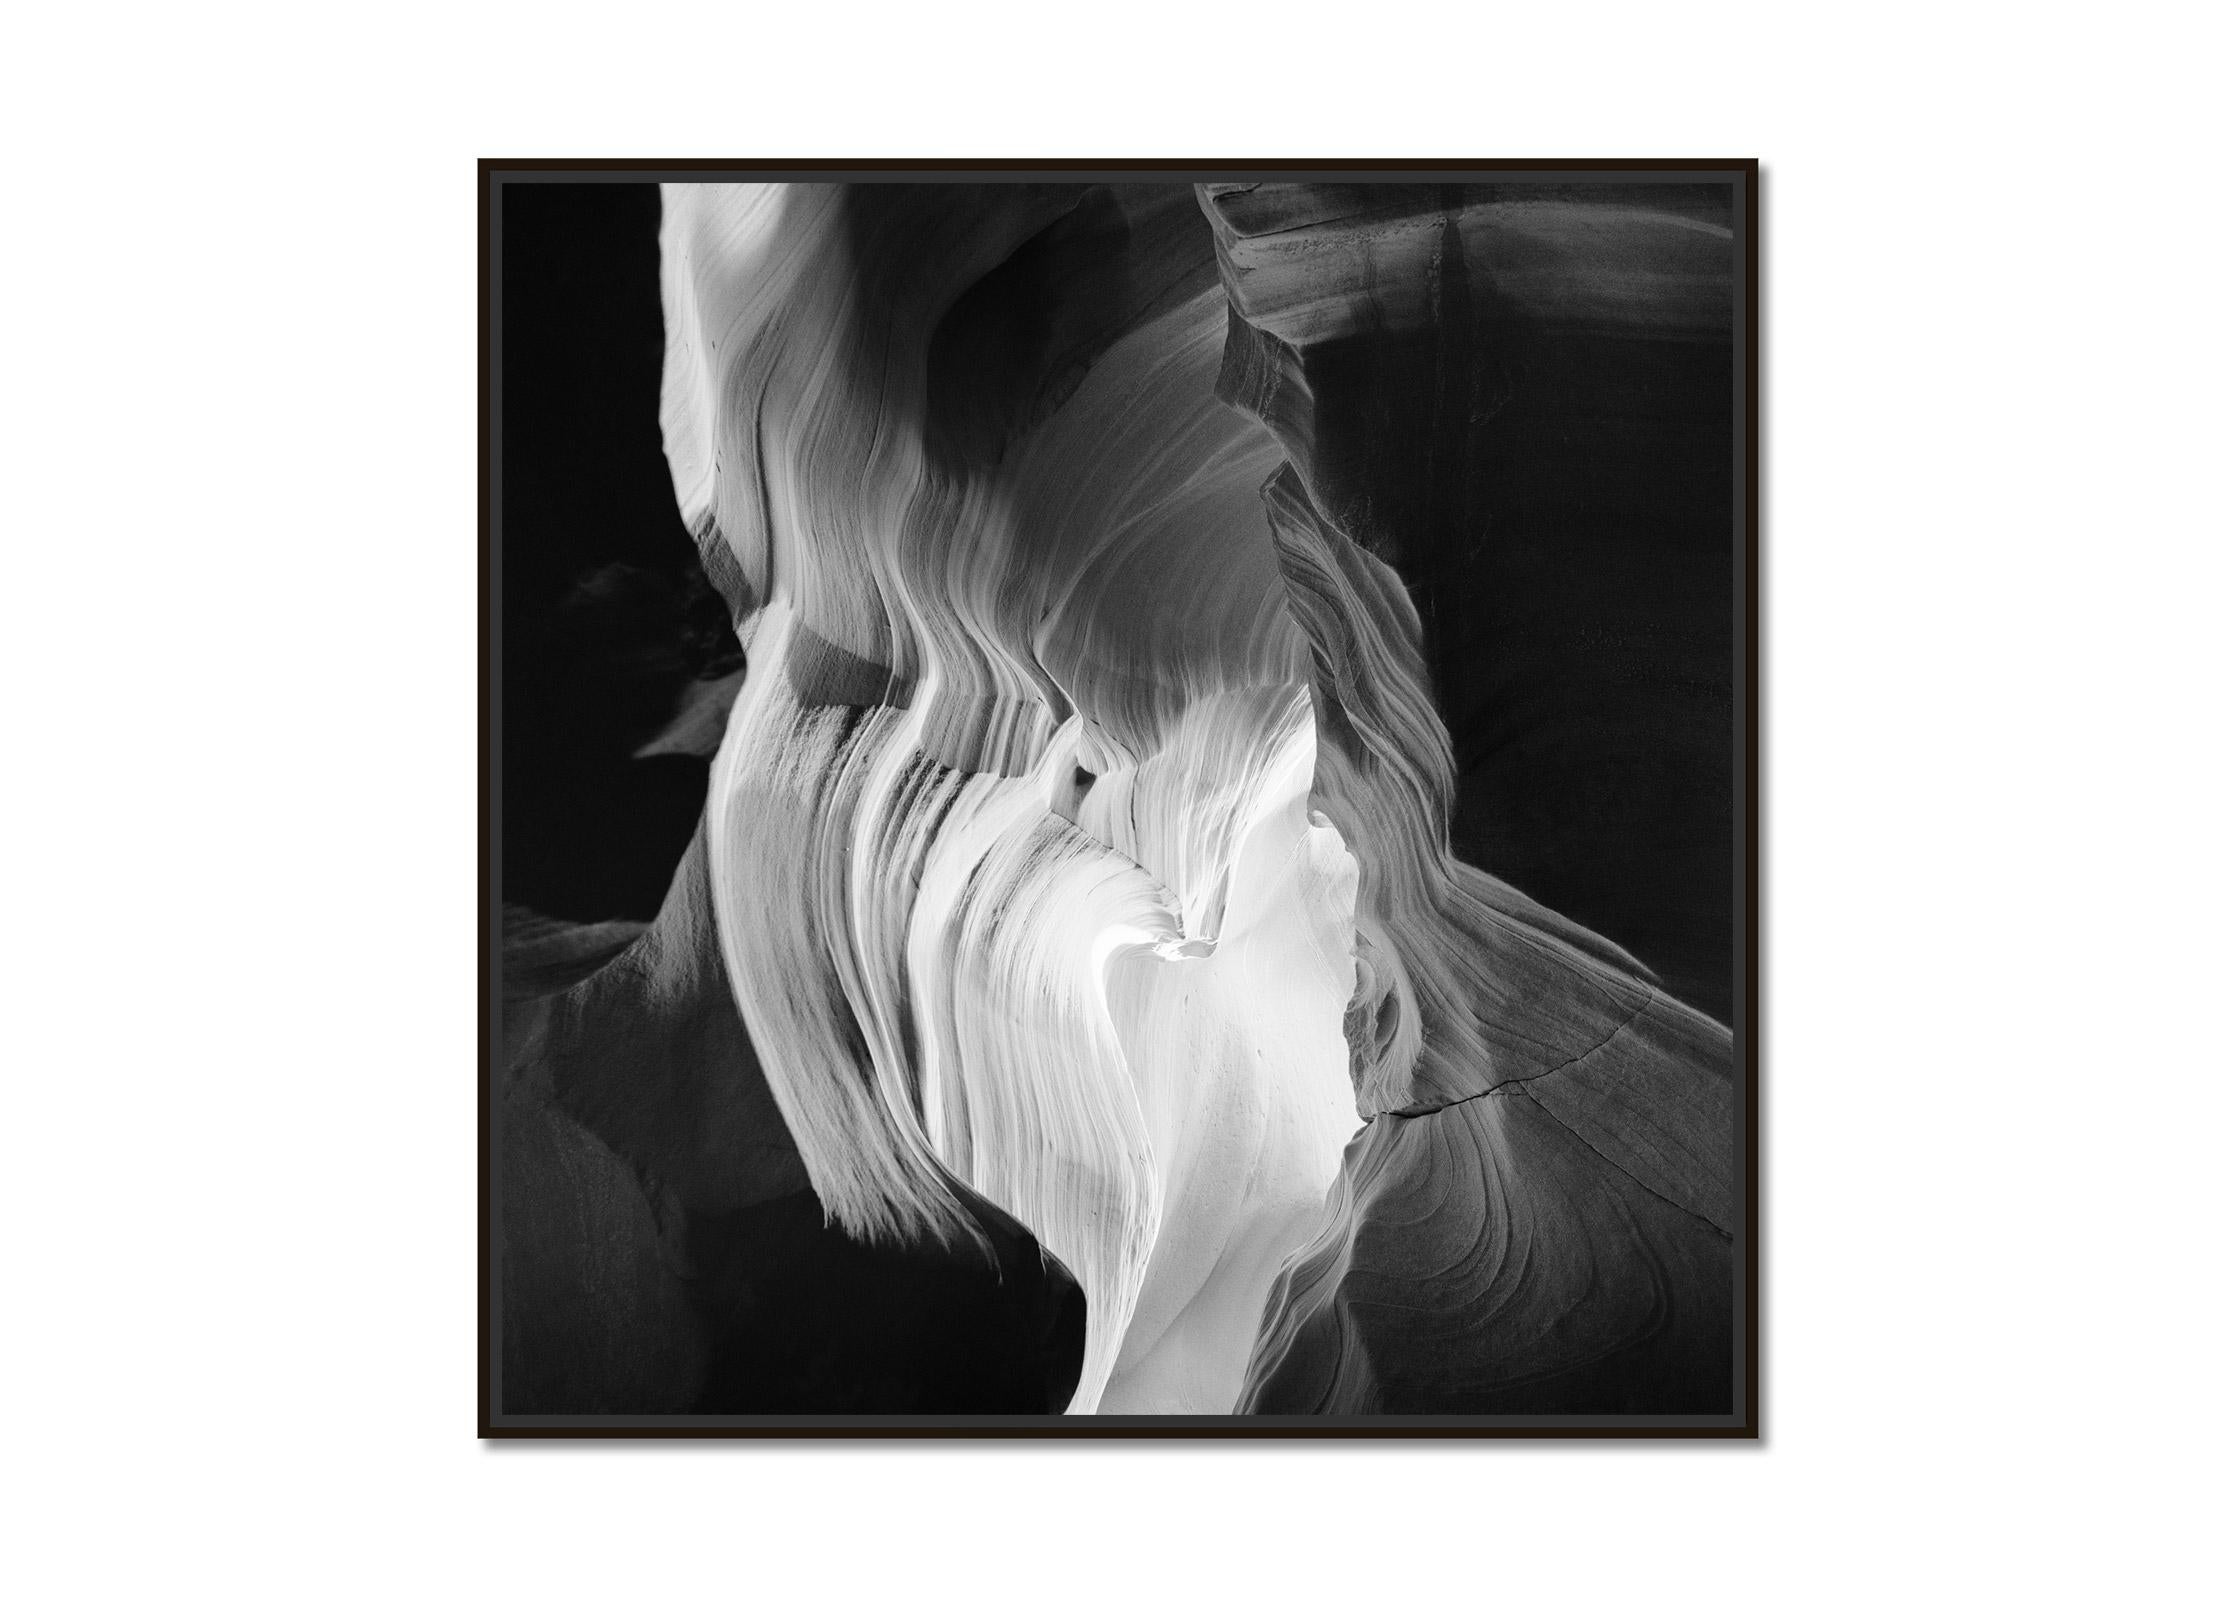 Heart, Antelope Canyon, Desert, USA, black and white photography, landscapes - Photograph by Gerald Berghammer, Ina Forstinger